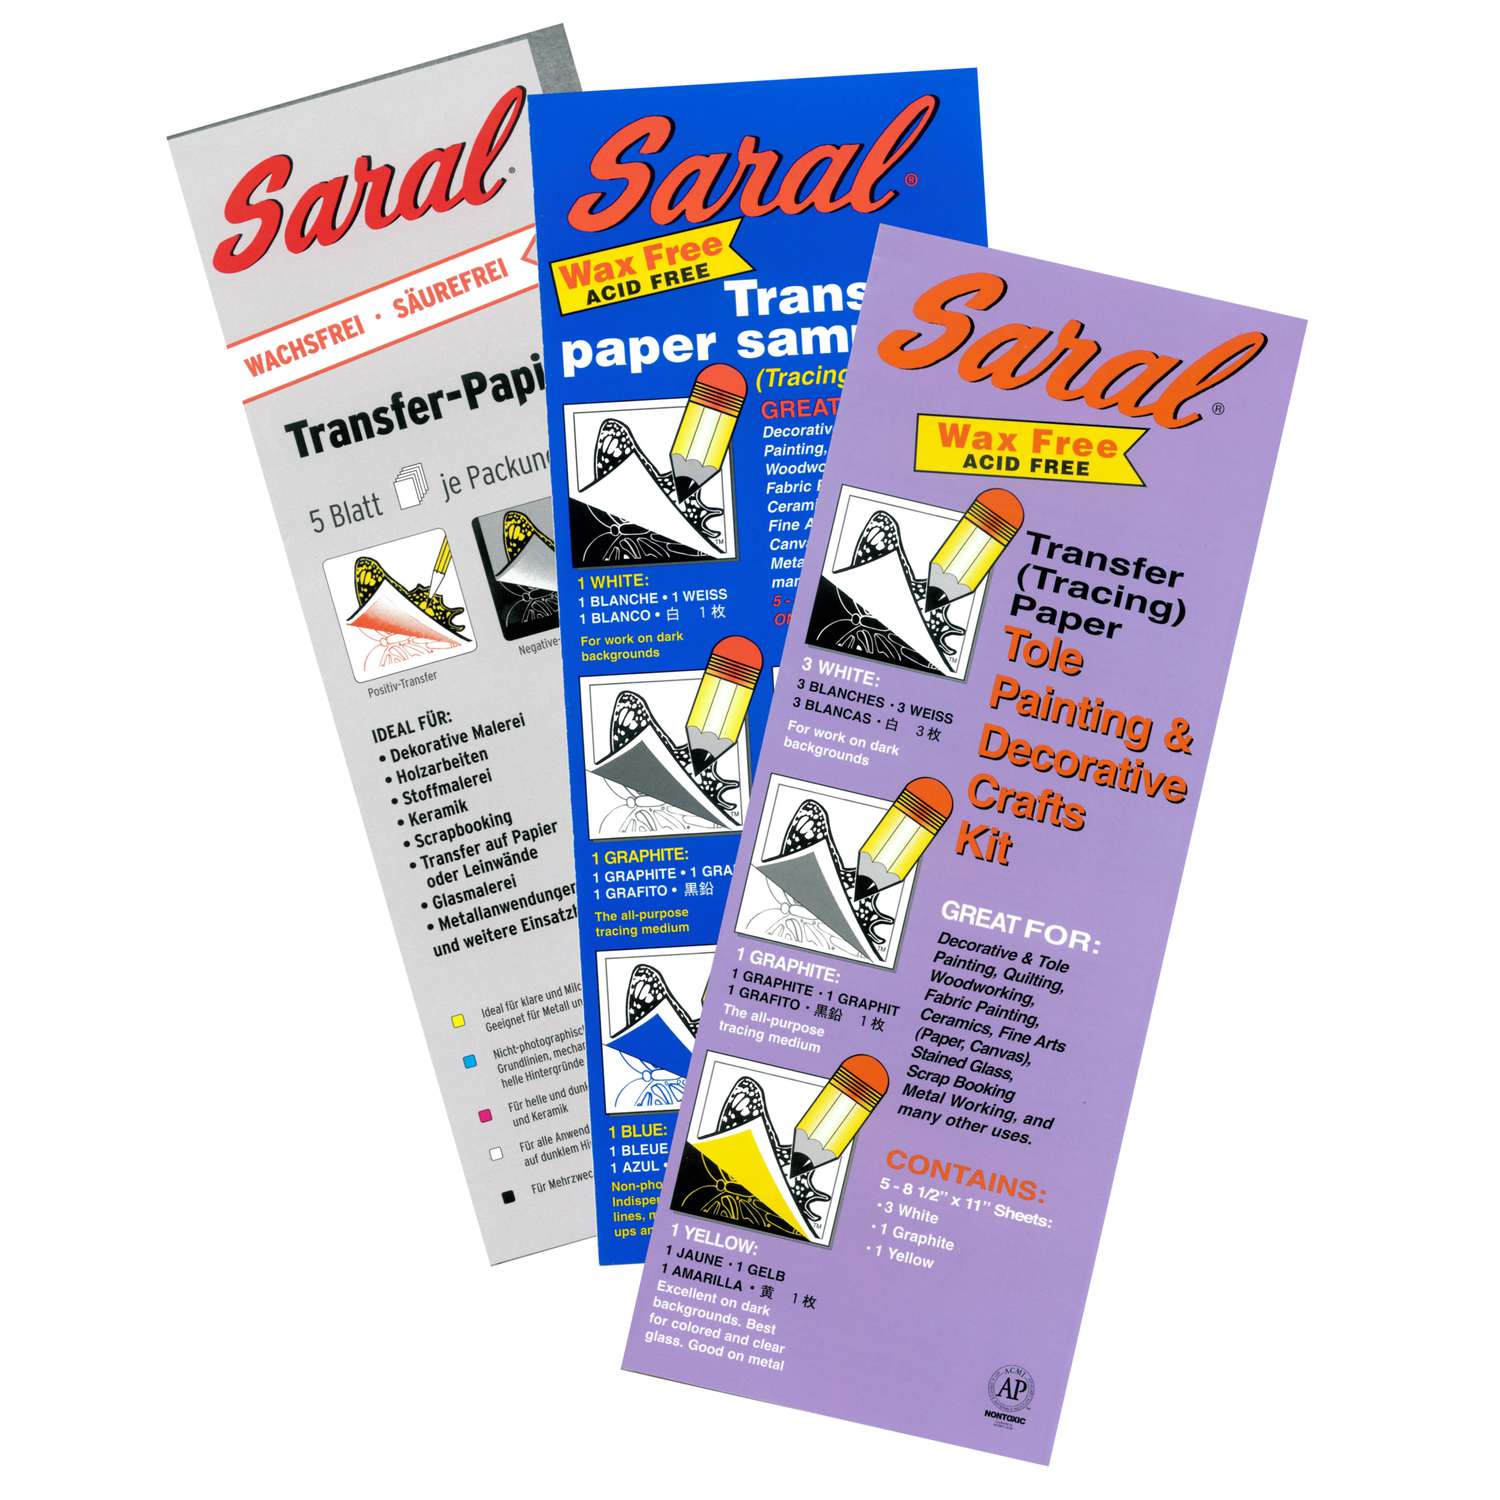 Saral Wax Free Transfer Paper